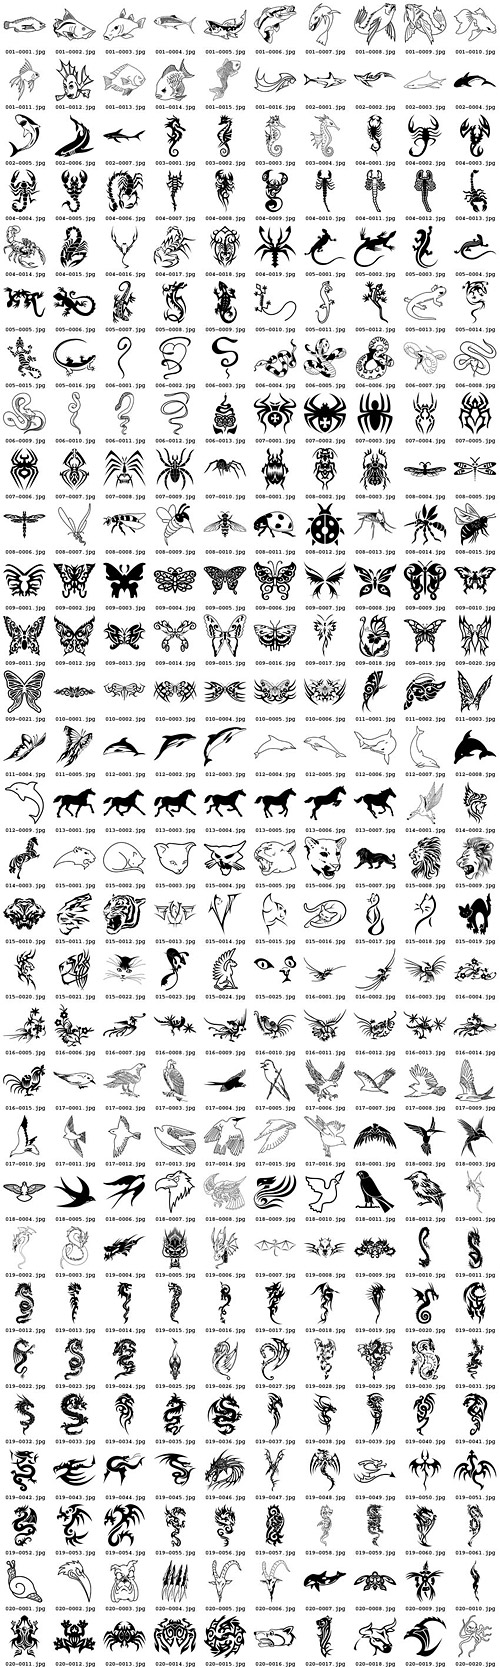 300 of the various animal totem